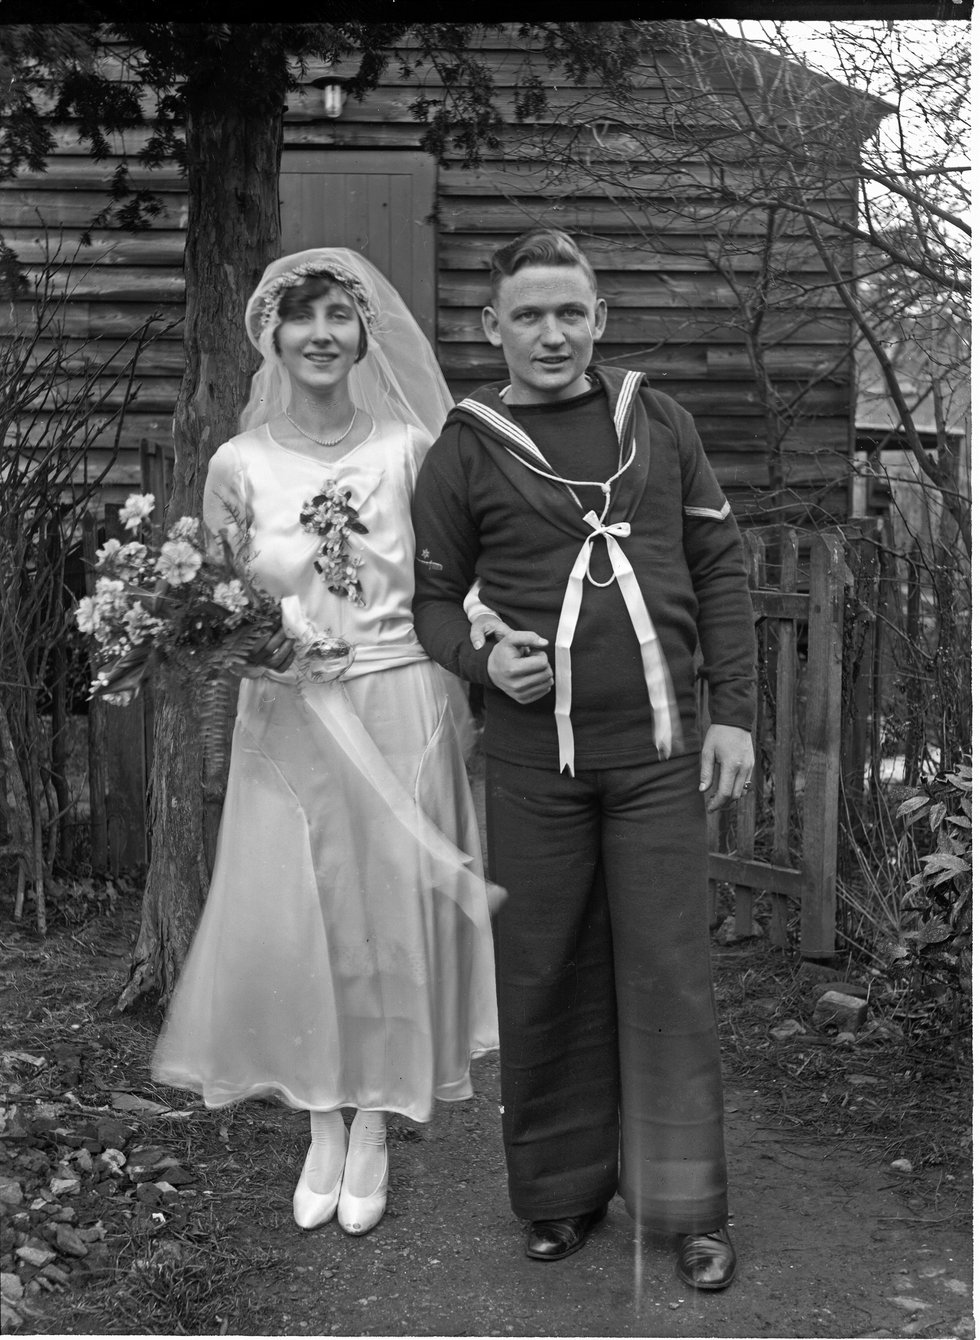 Sidney Francis (1891-1973) Sailor’s Wedding, c. 1920s, digital print from a glass plate negative, reproduced by permission of Surrey History Centre (SHC ref 9524).jpg